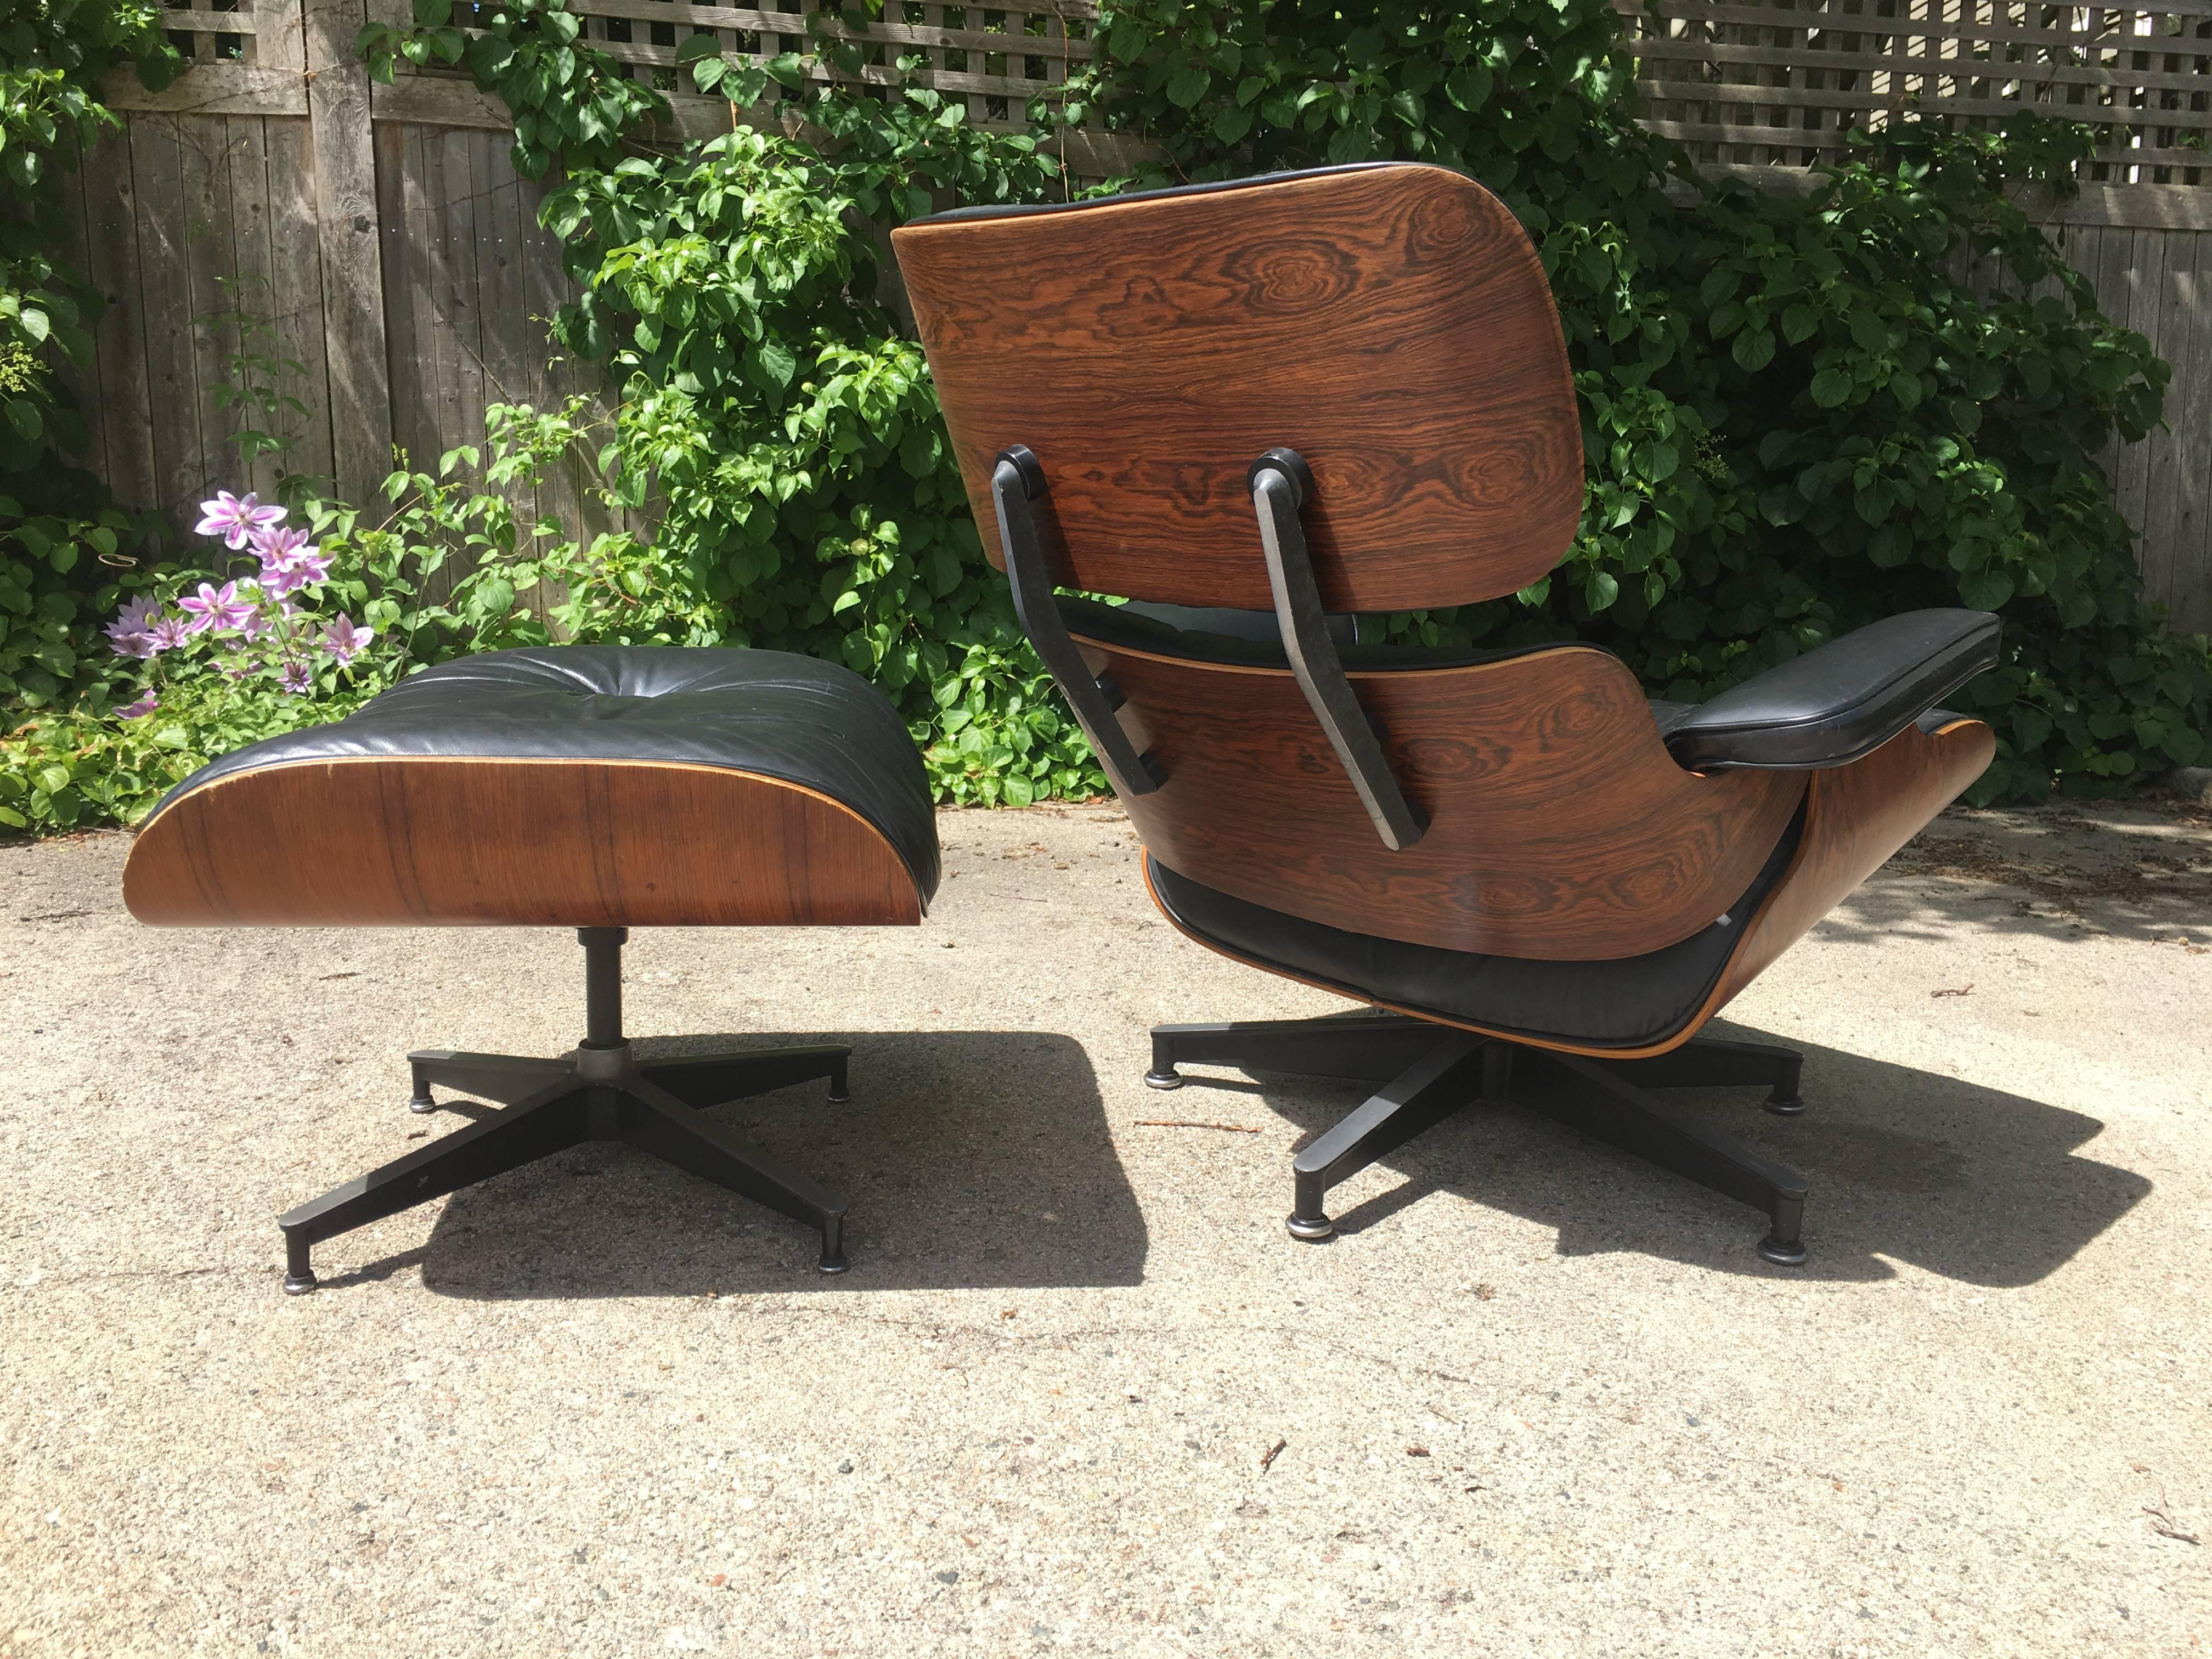 1970s, Herman Miller Eames lounge chair and ottoman in rosewood. From original owner. All original parts. Leather has normal wear but no tears or holes. Rosewood is superb with incredible grain patterns and color.